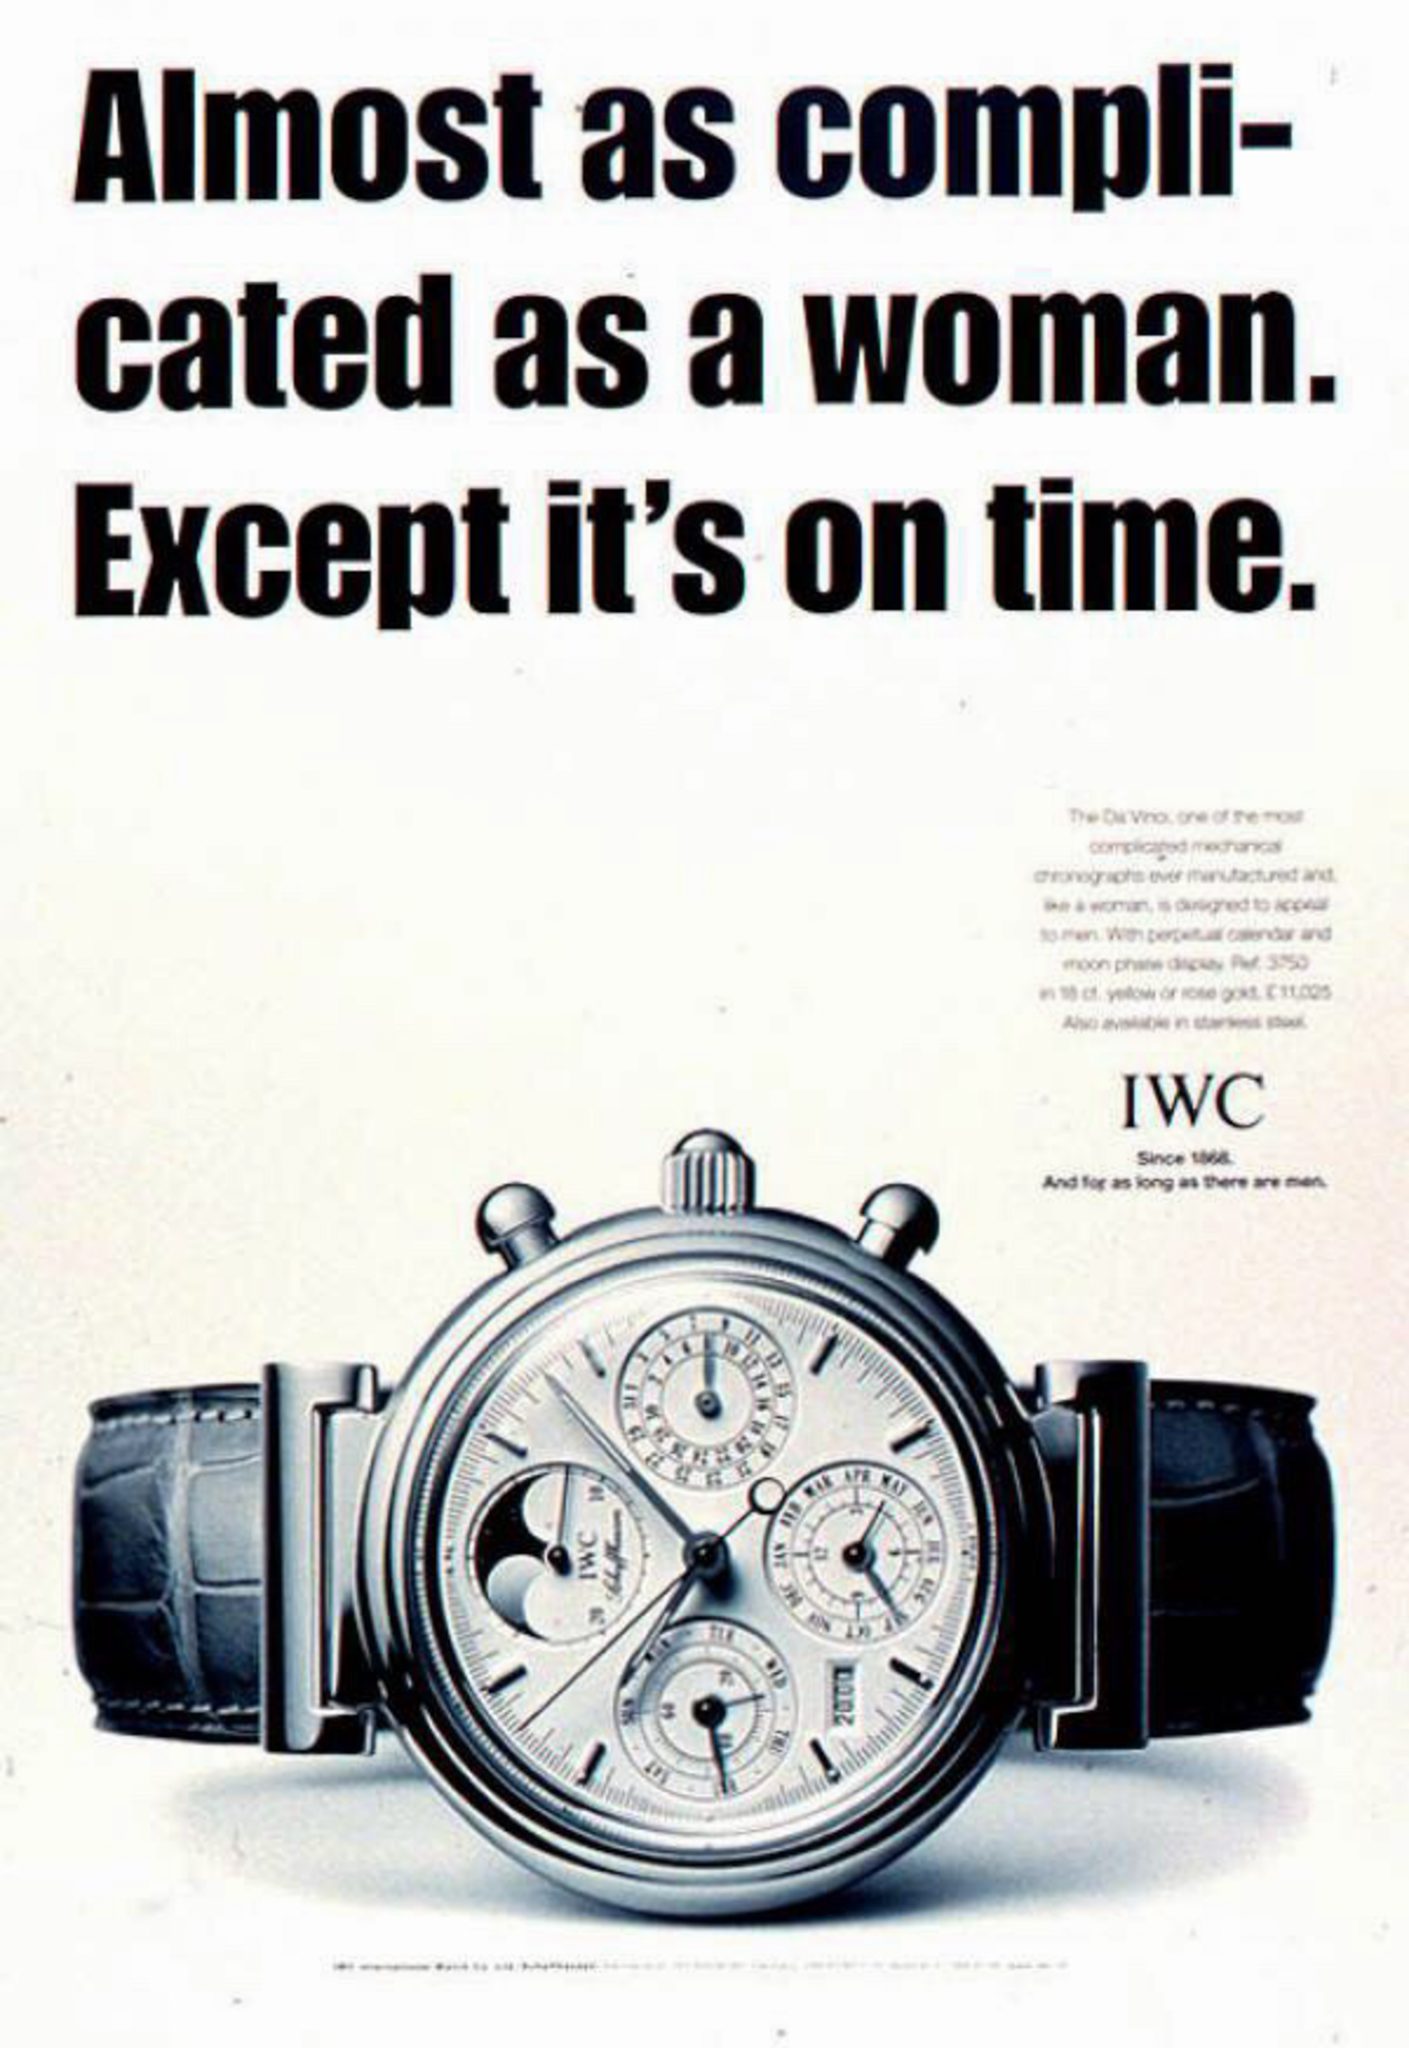 IWC-Perpetual-Calendar-Rattrapante-Ad-Almost-As-Complicated-As-A-Woman